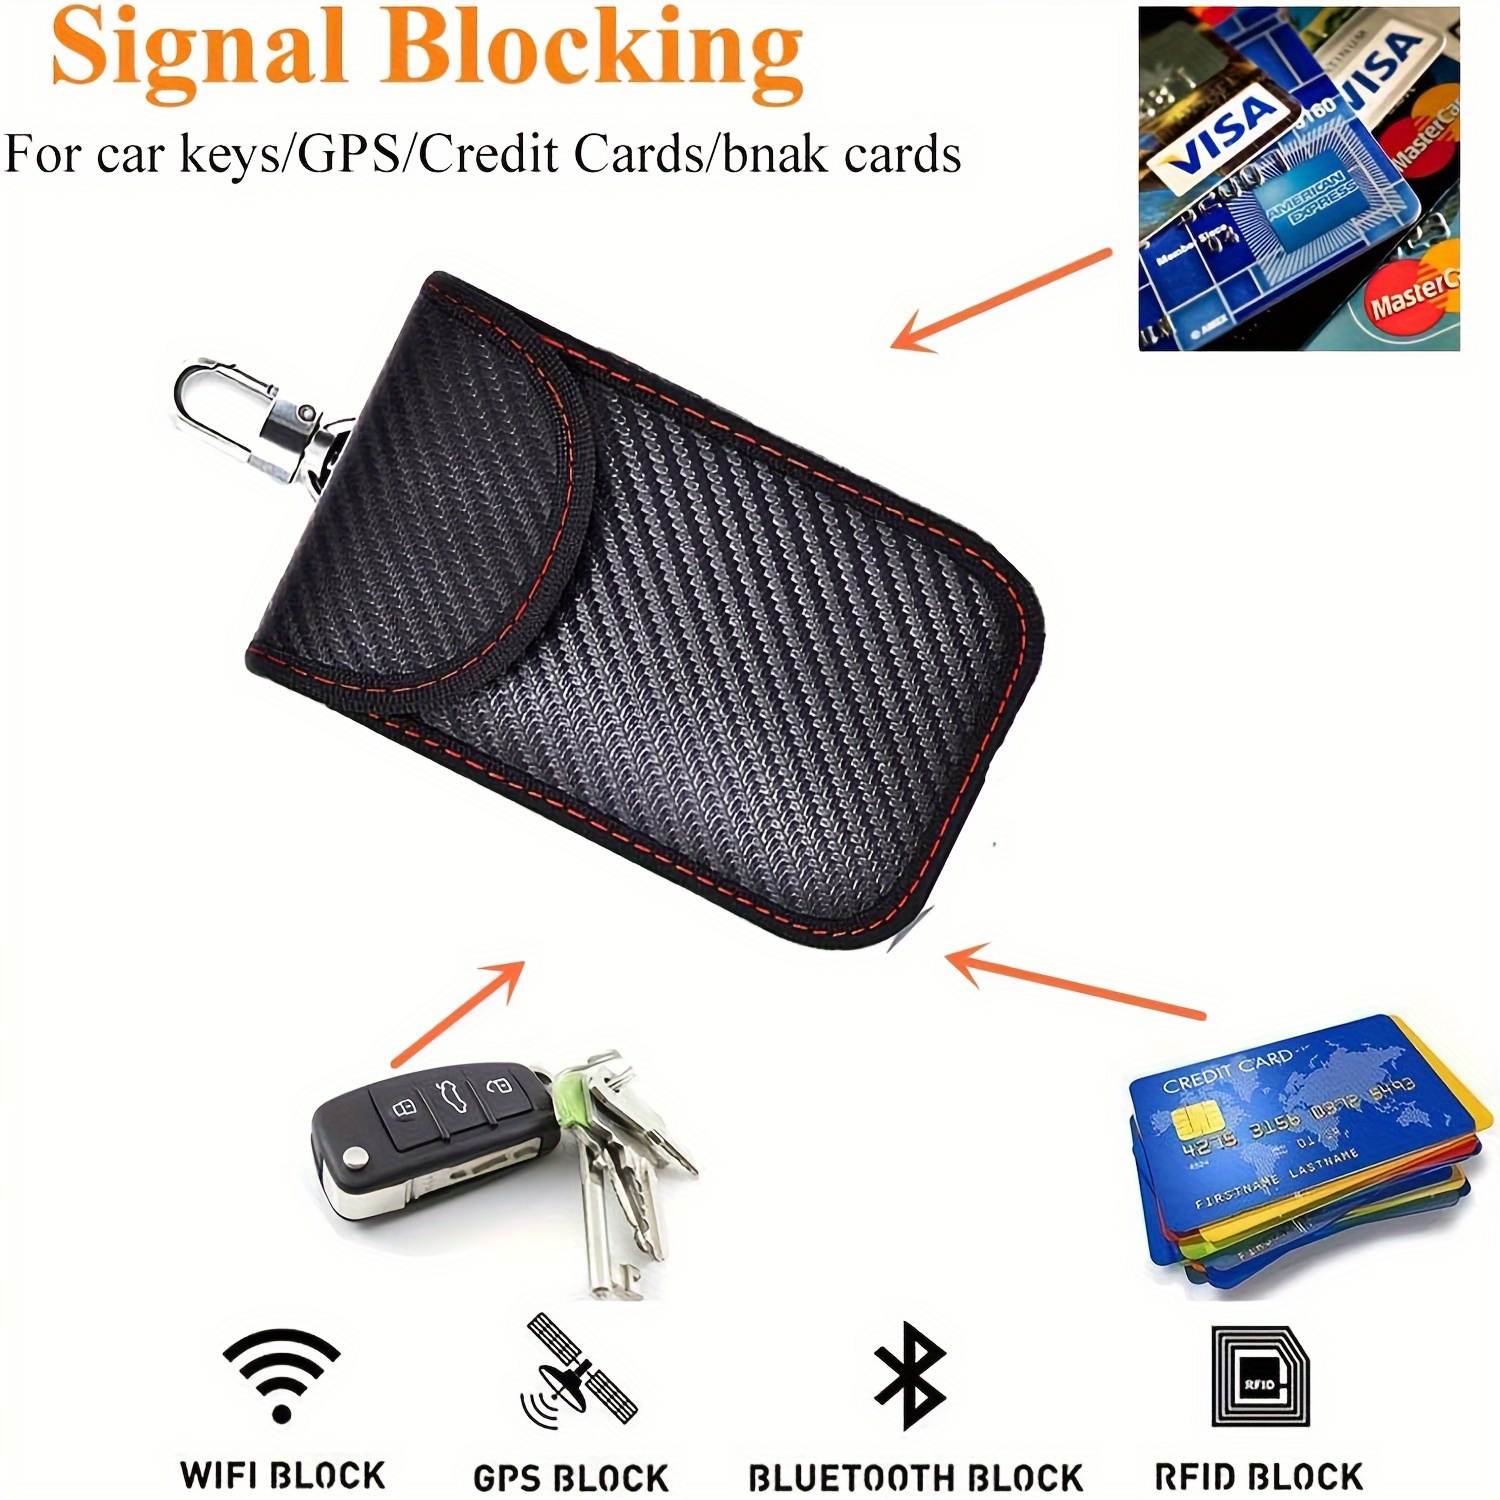 This RFID-blocking key-fob case works like a faraday cage to